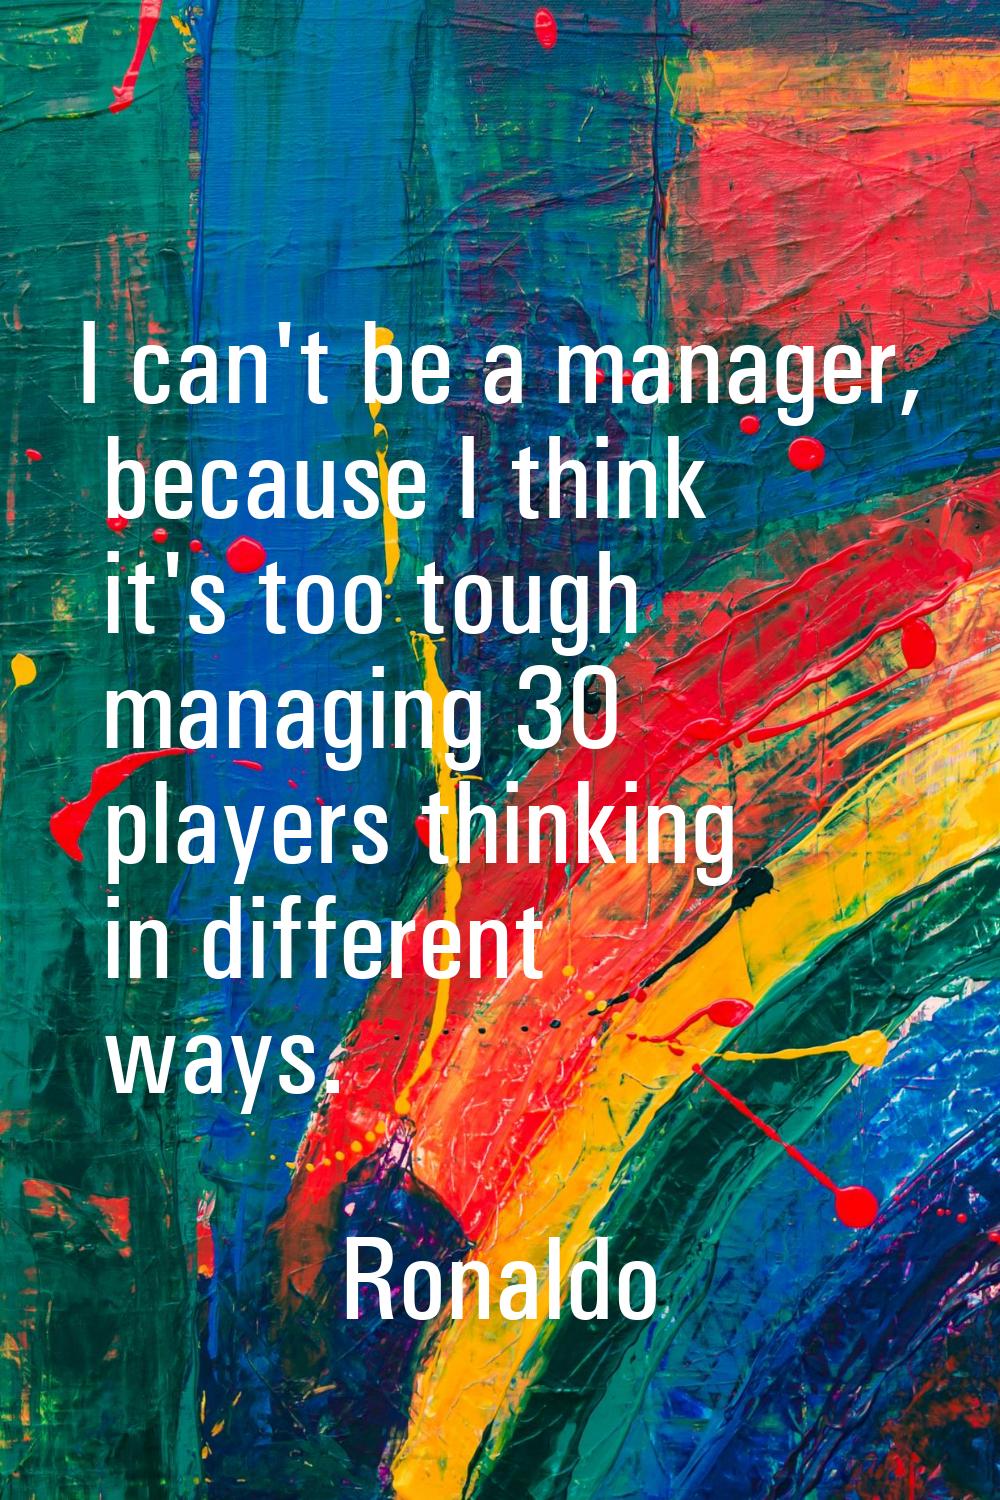 I can't be a manager, because I think it's too tough managing 30 players thinking in different ways